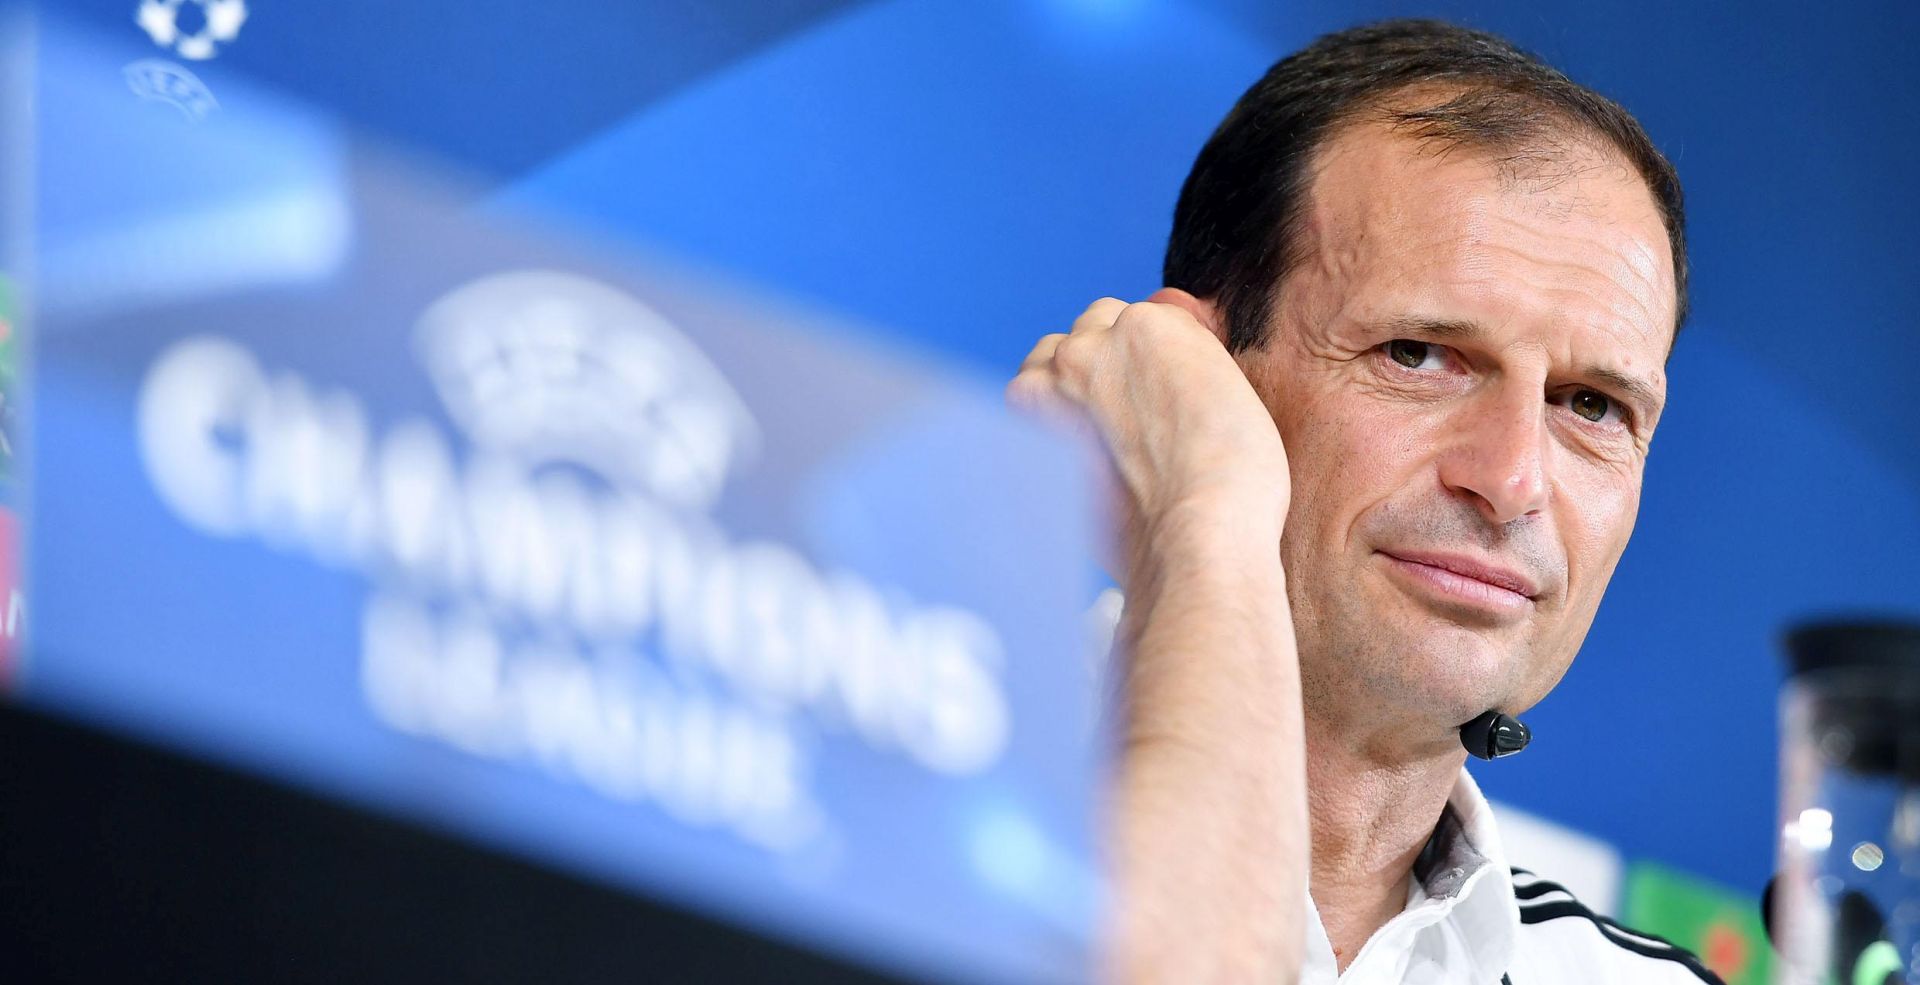 epa05901934 Juventus' coach Massimiliano Allegri attends the press conference on the eve of the UEFA Champions League quarter final first leg soccer match between Juventus FC and FC Barcelona at Juventus Stadium in Turin, Italy, 10 April 2017.  EPA/ALESSANDRO DI MARCO